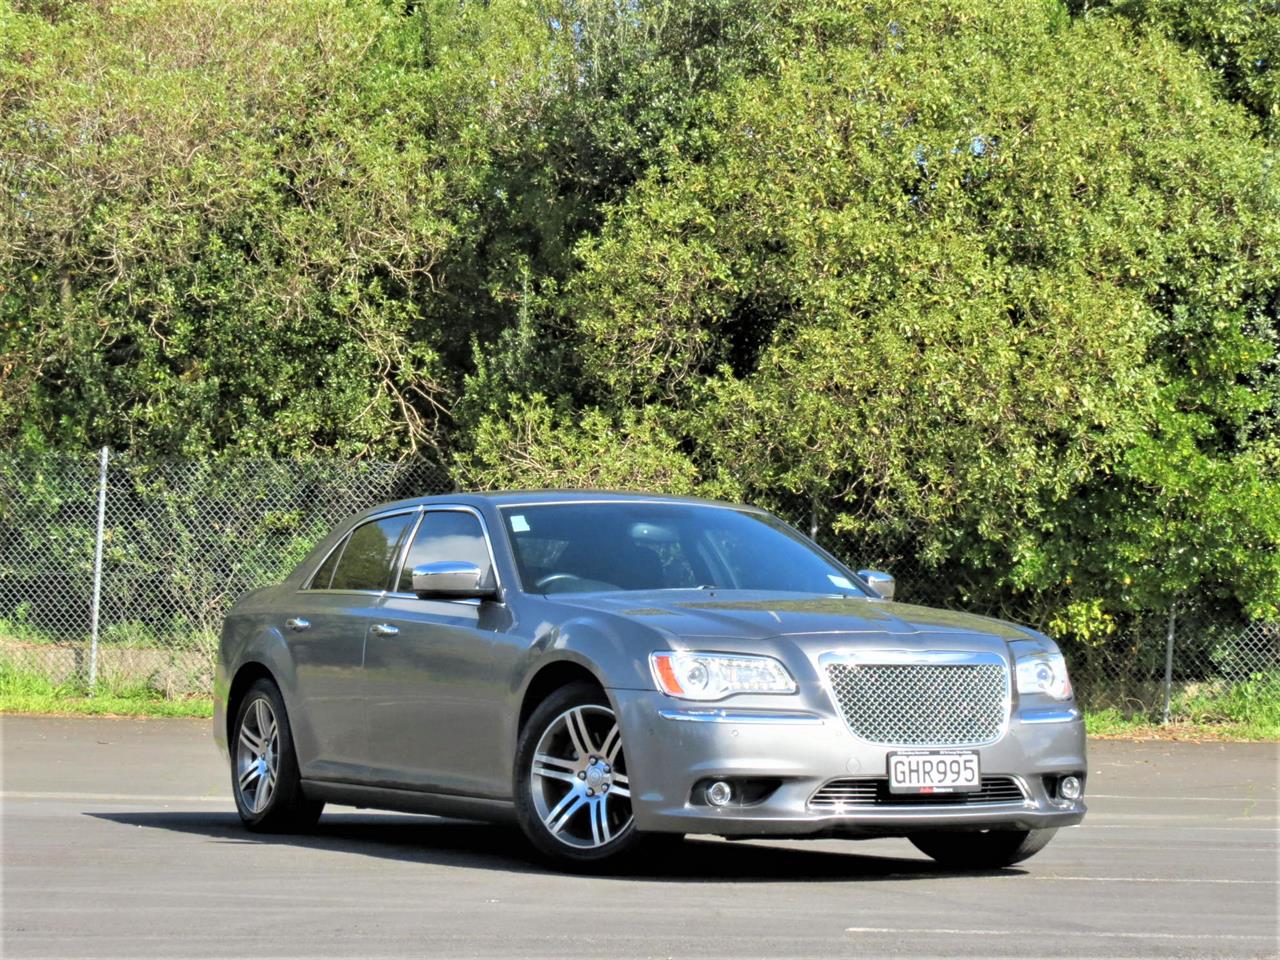 NZC 2012 Chrysler 300C just arrived to Auckland